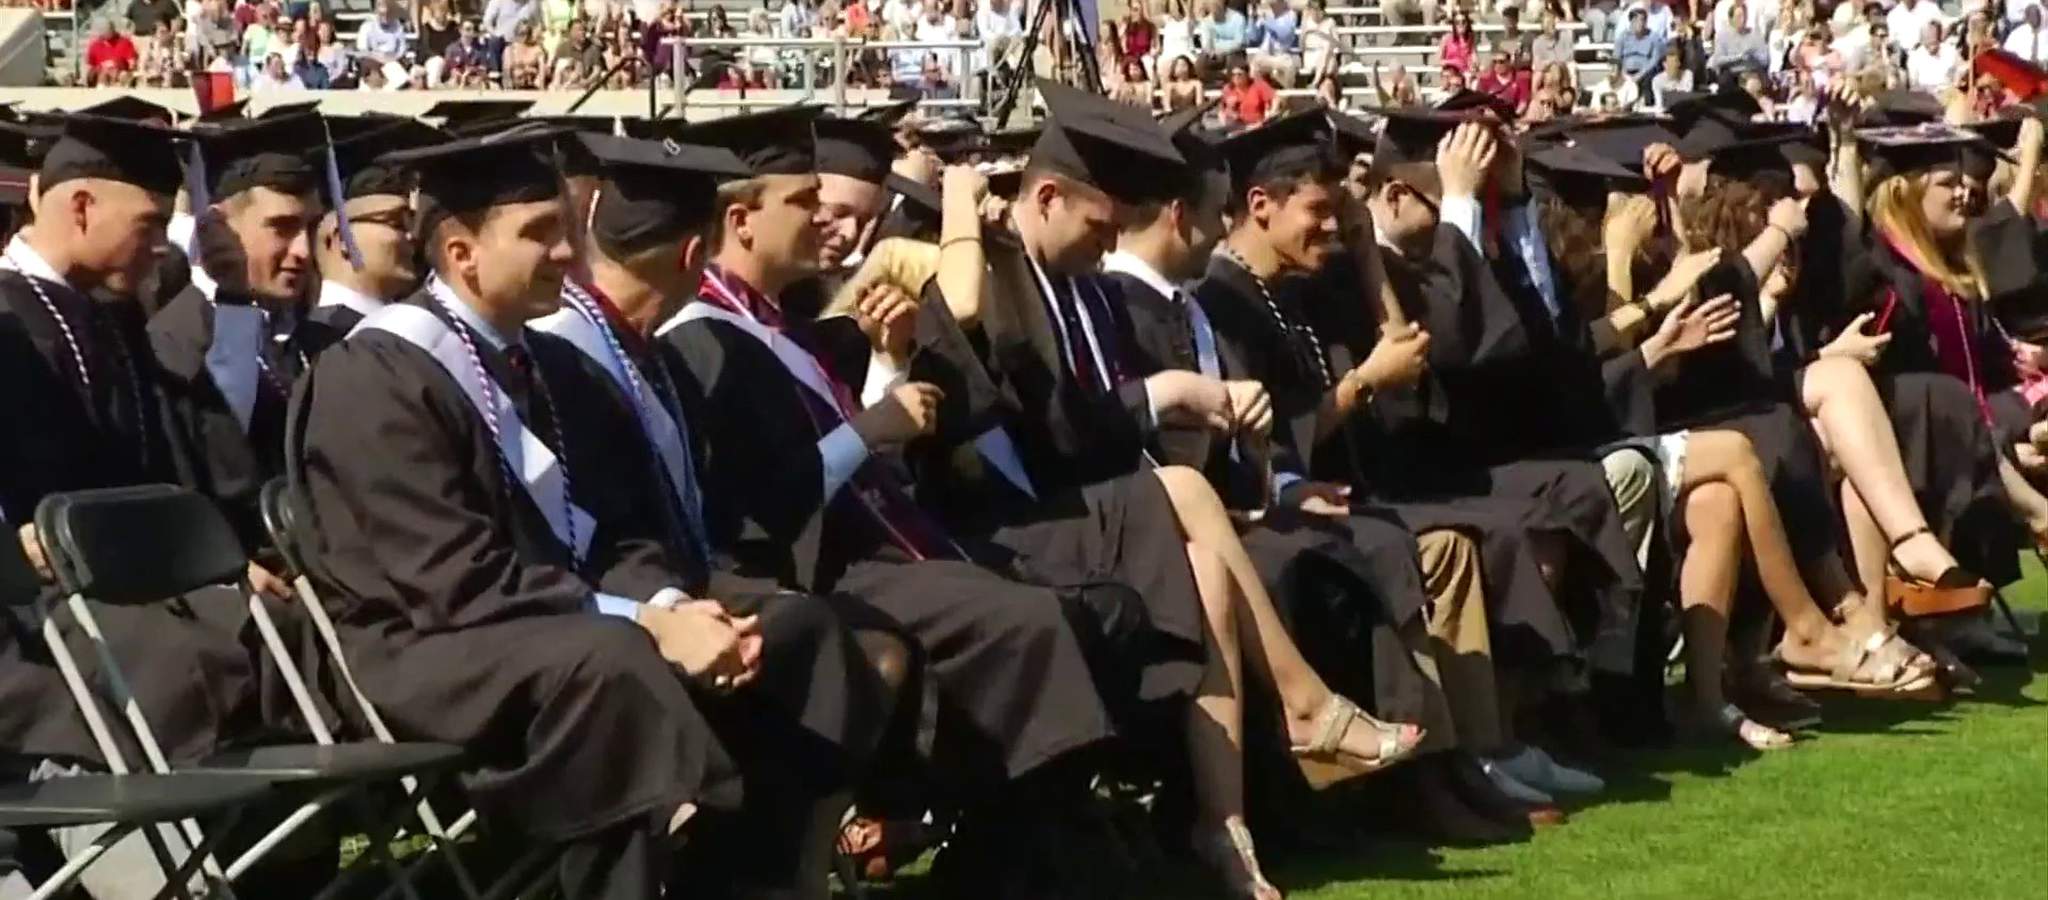 ‘All of Hokie Nation is thrilled’: Virginia Tech plans for multiple in-person commencement ceremonies